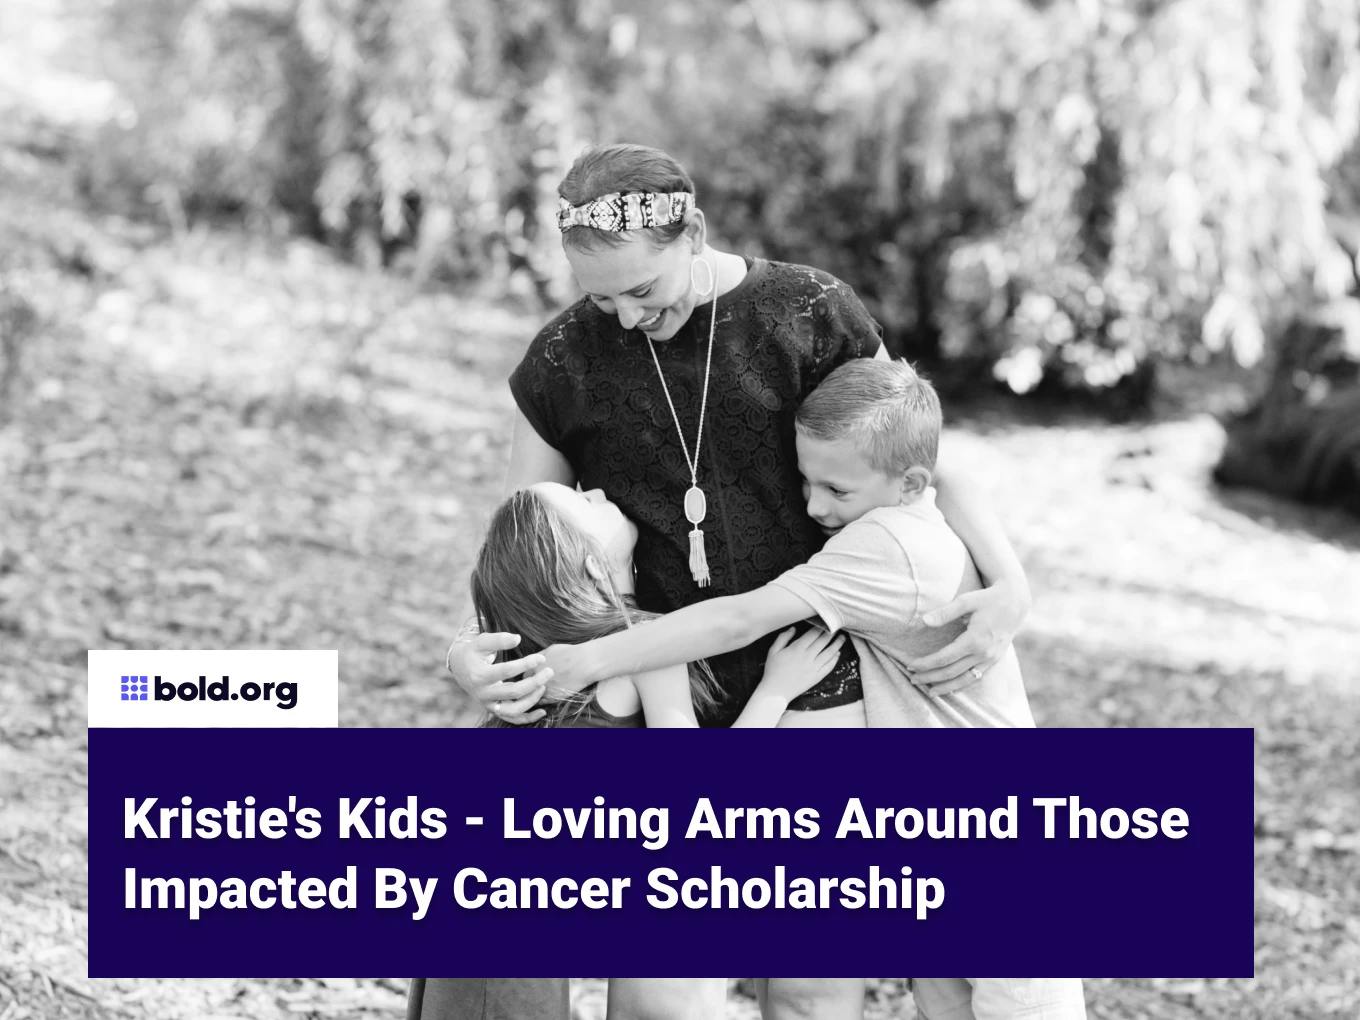 Kristie's Kids - Loving Arms Around Those Impacted By Cancer Scholarship